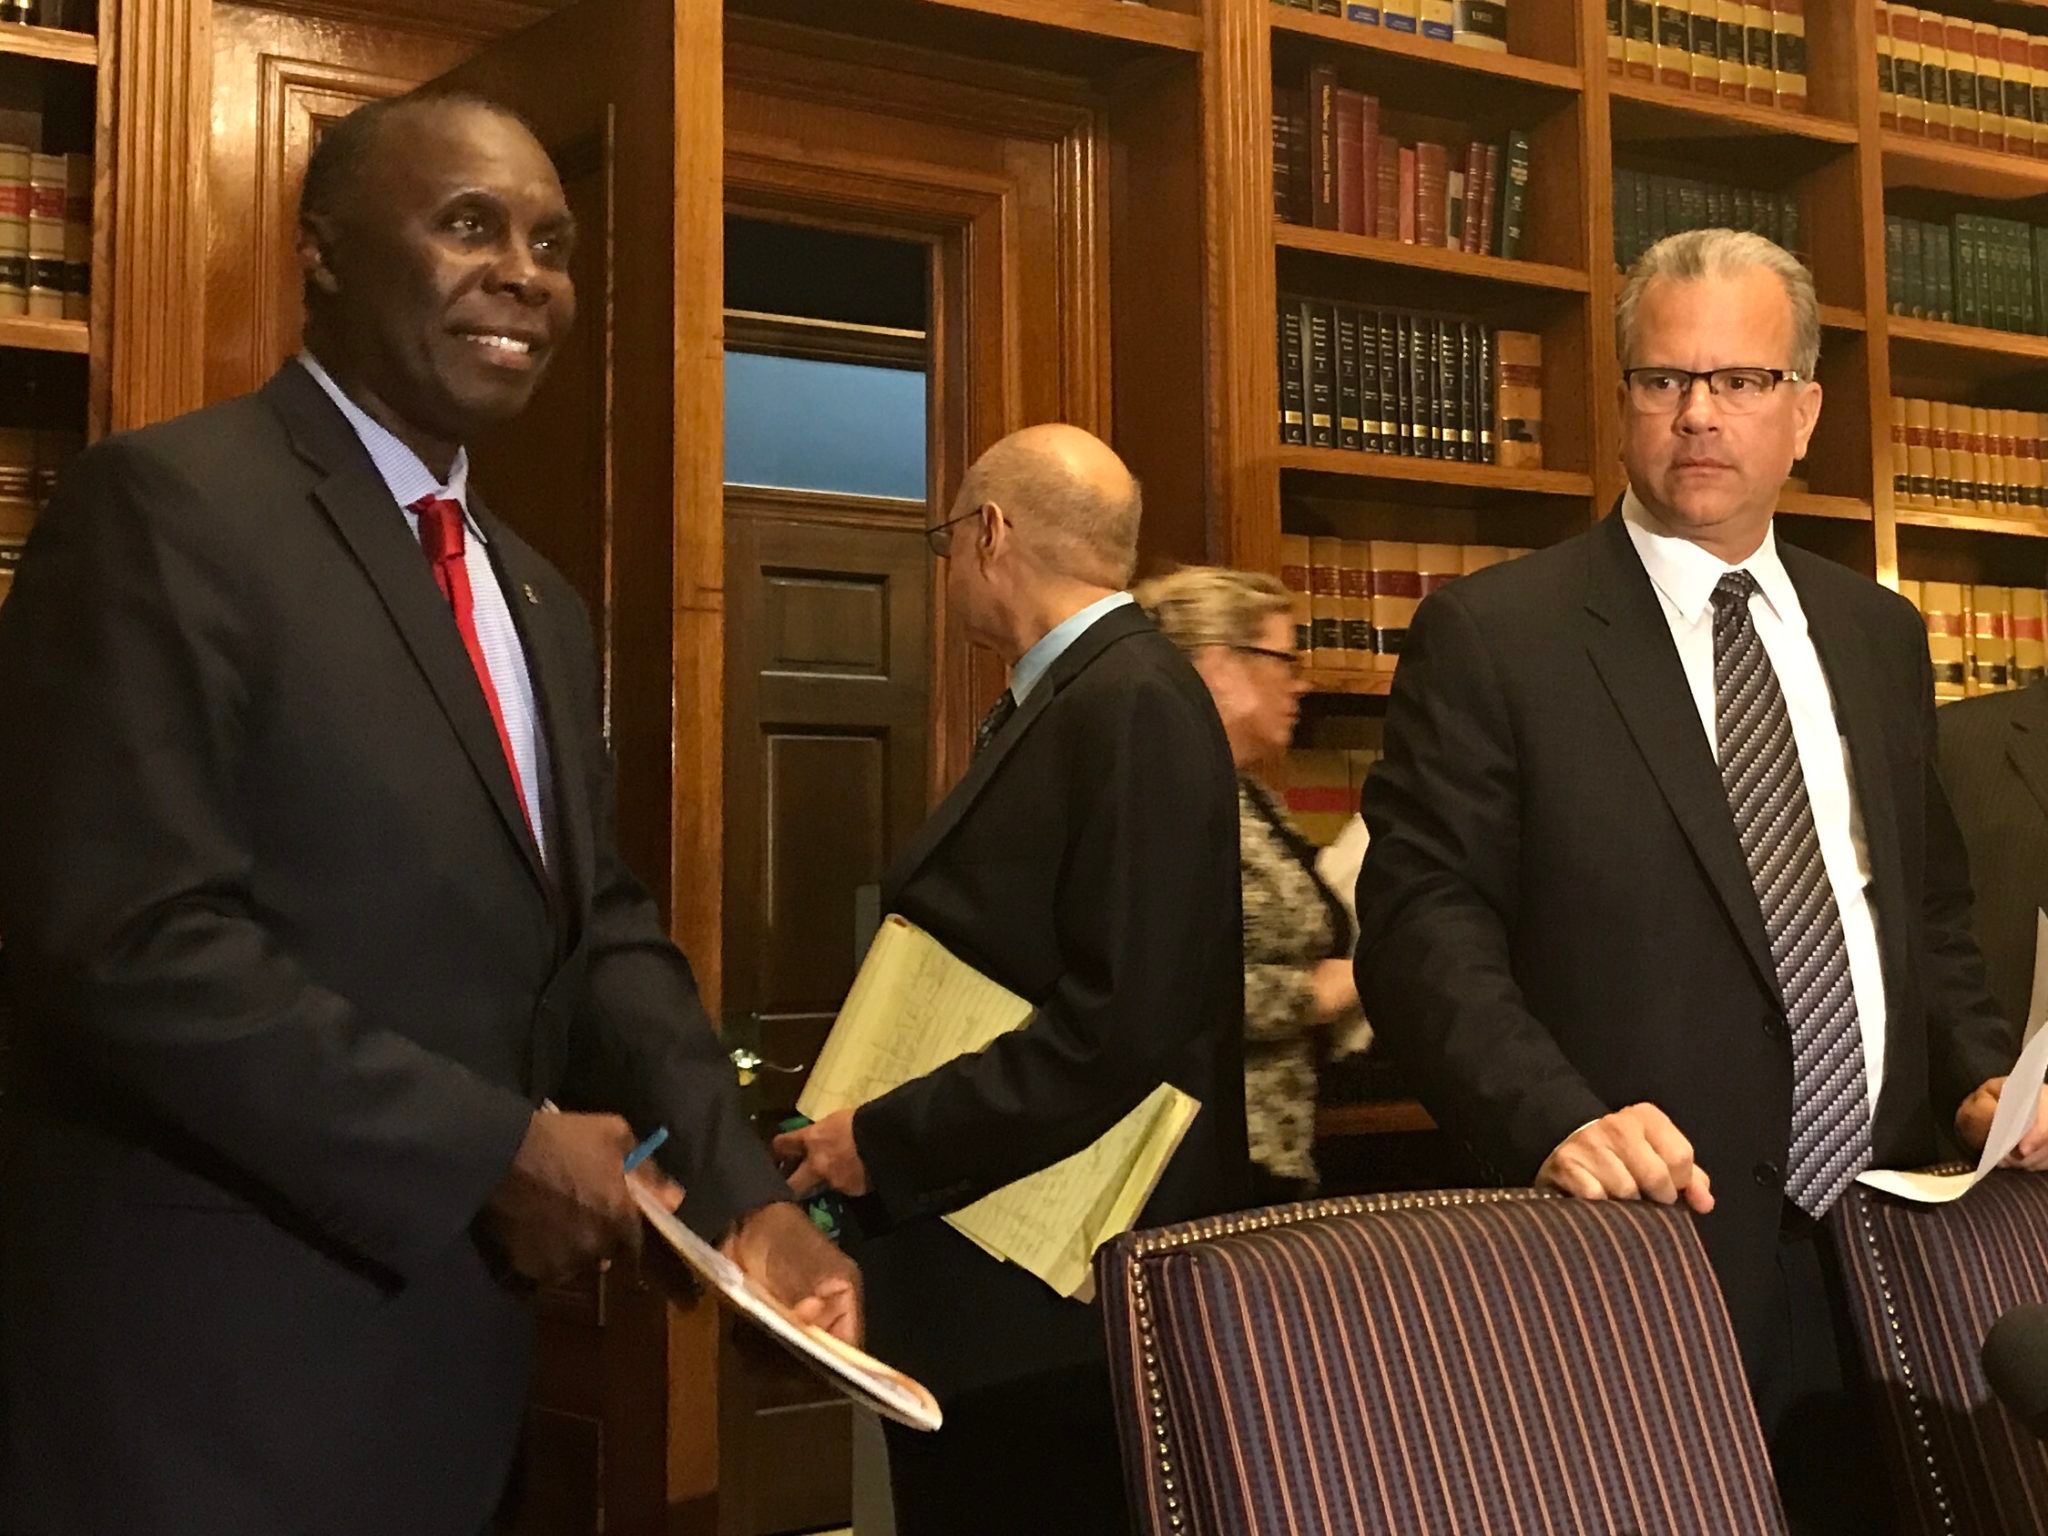 R.I. HOUSE FINANCE Chairman Marvin L. Abney, left, with House Speaker Nicholas A. Mattiello, right, on June 15 unveiled the Democrat's $9.2 billion spending plan for fiscal 2018. / PBN FILE PHOTO/ELI SHERMAN